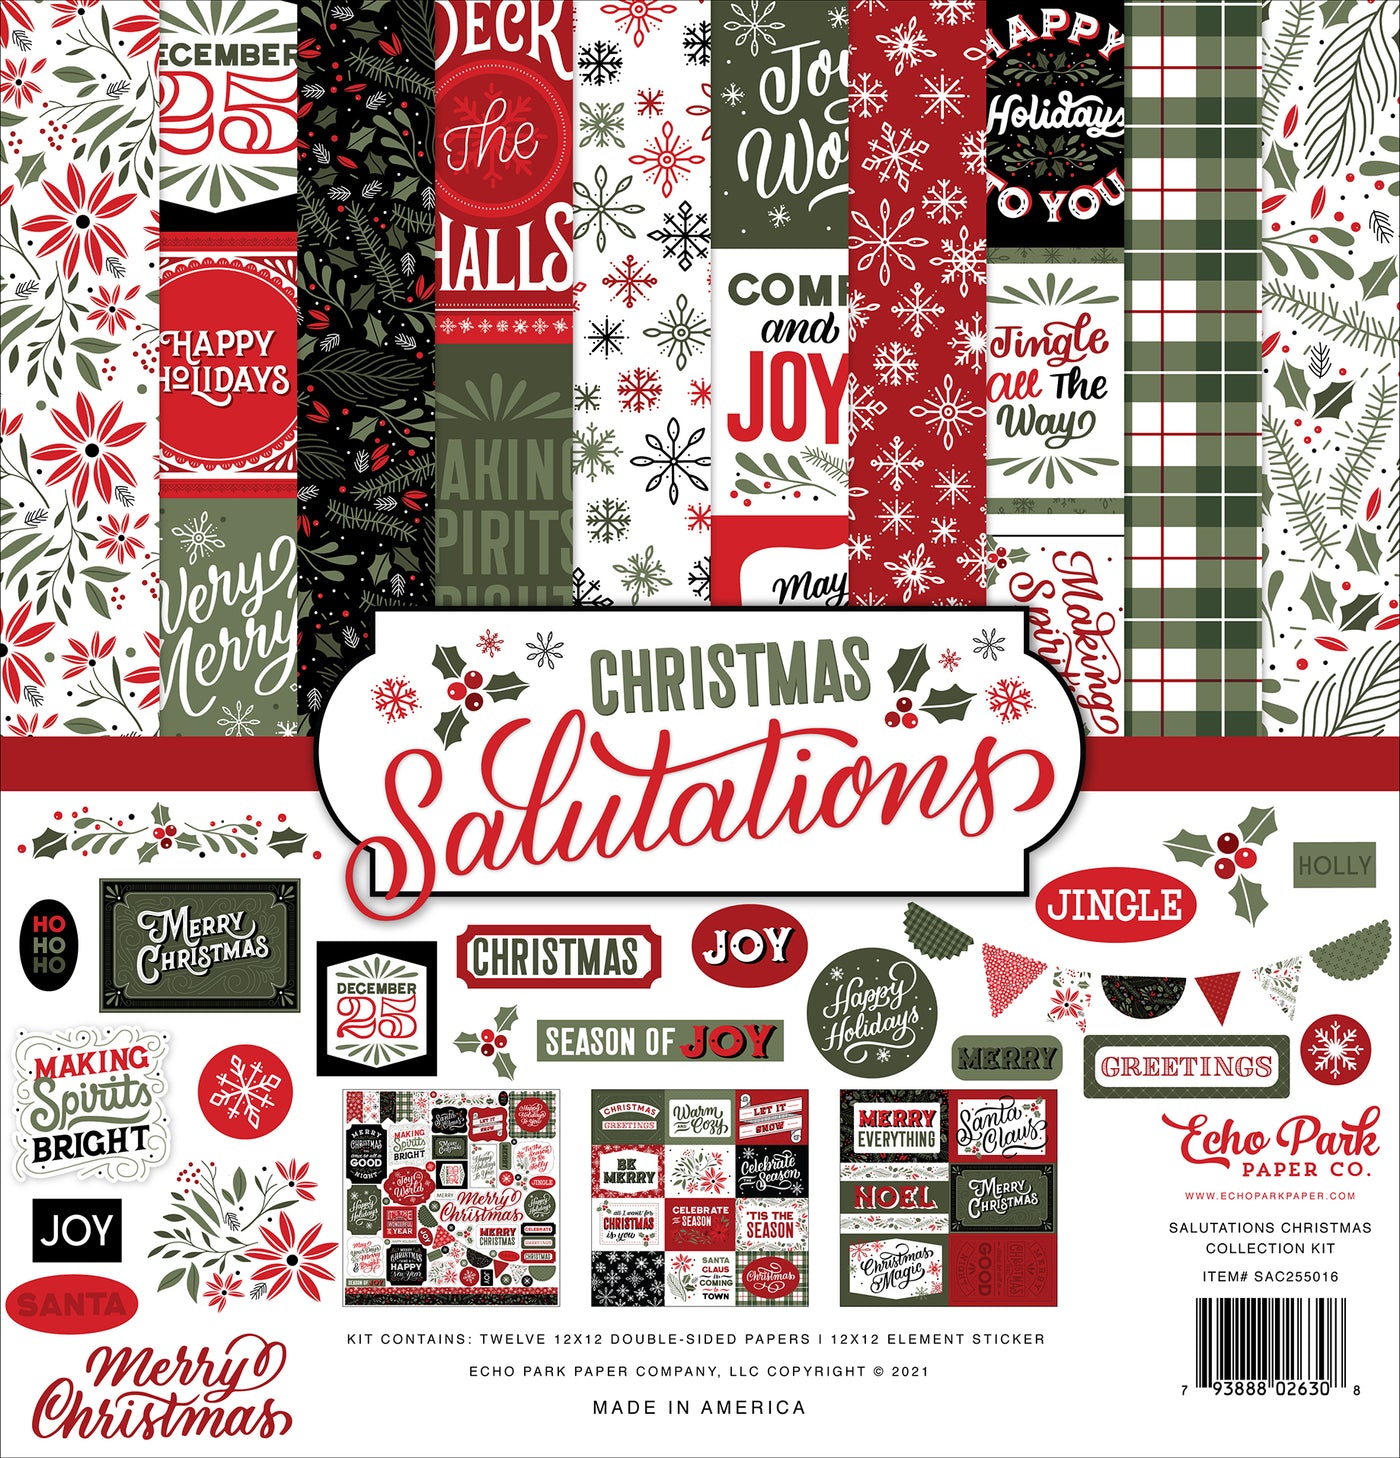 This 12" x 12" Collection Kit is part of the Christmas Salutations Collection from Echo Park.